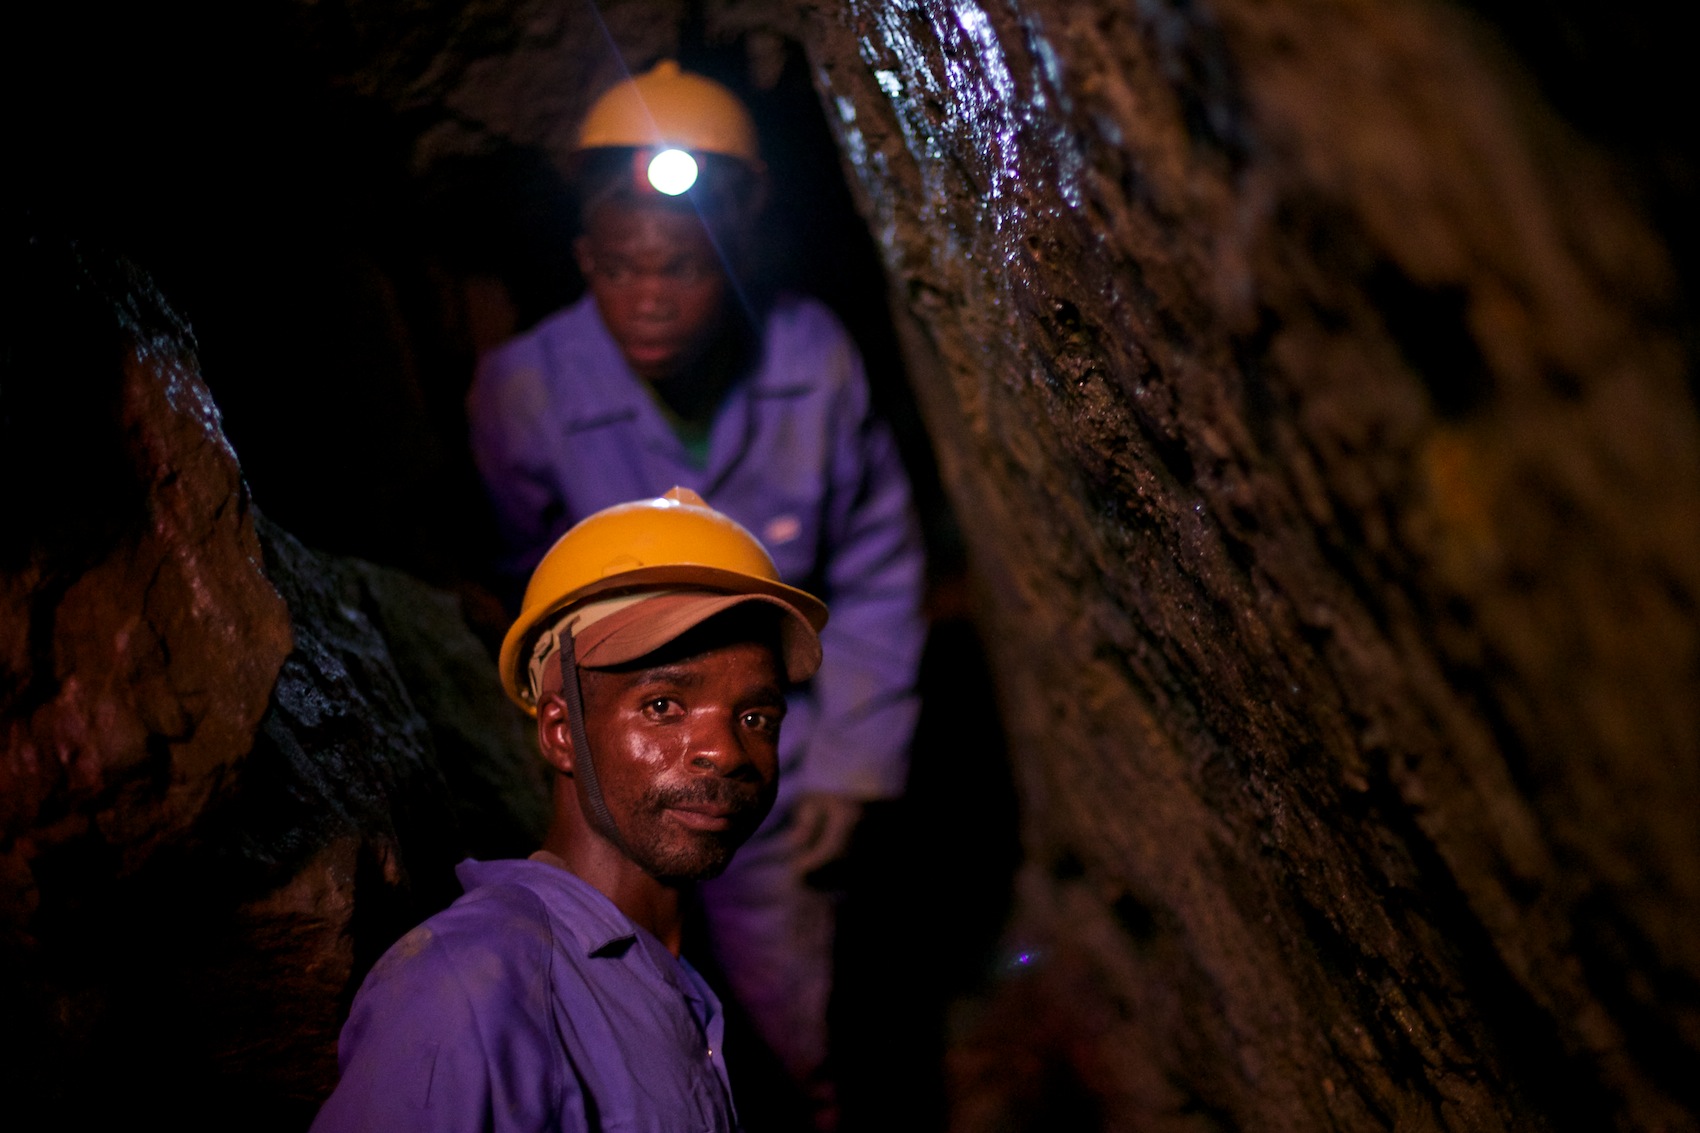 ThinkProgress: 9 Things You Need to Know about Conflict Minerals